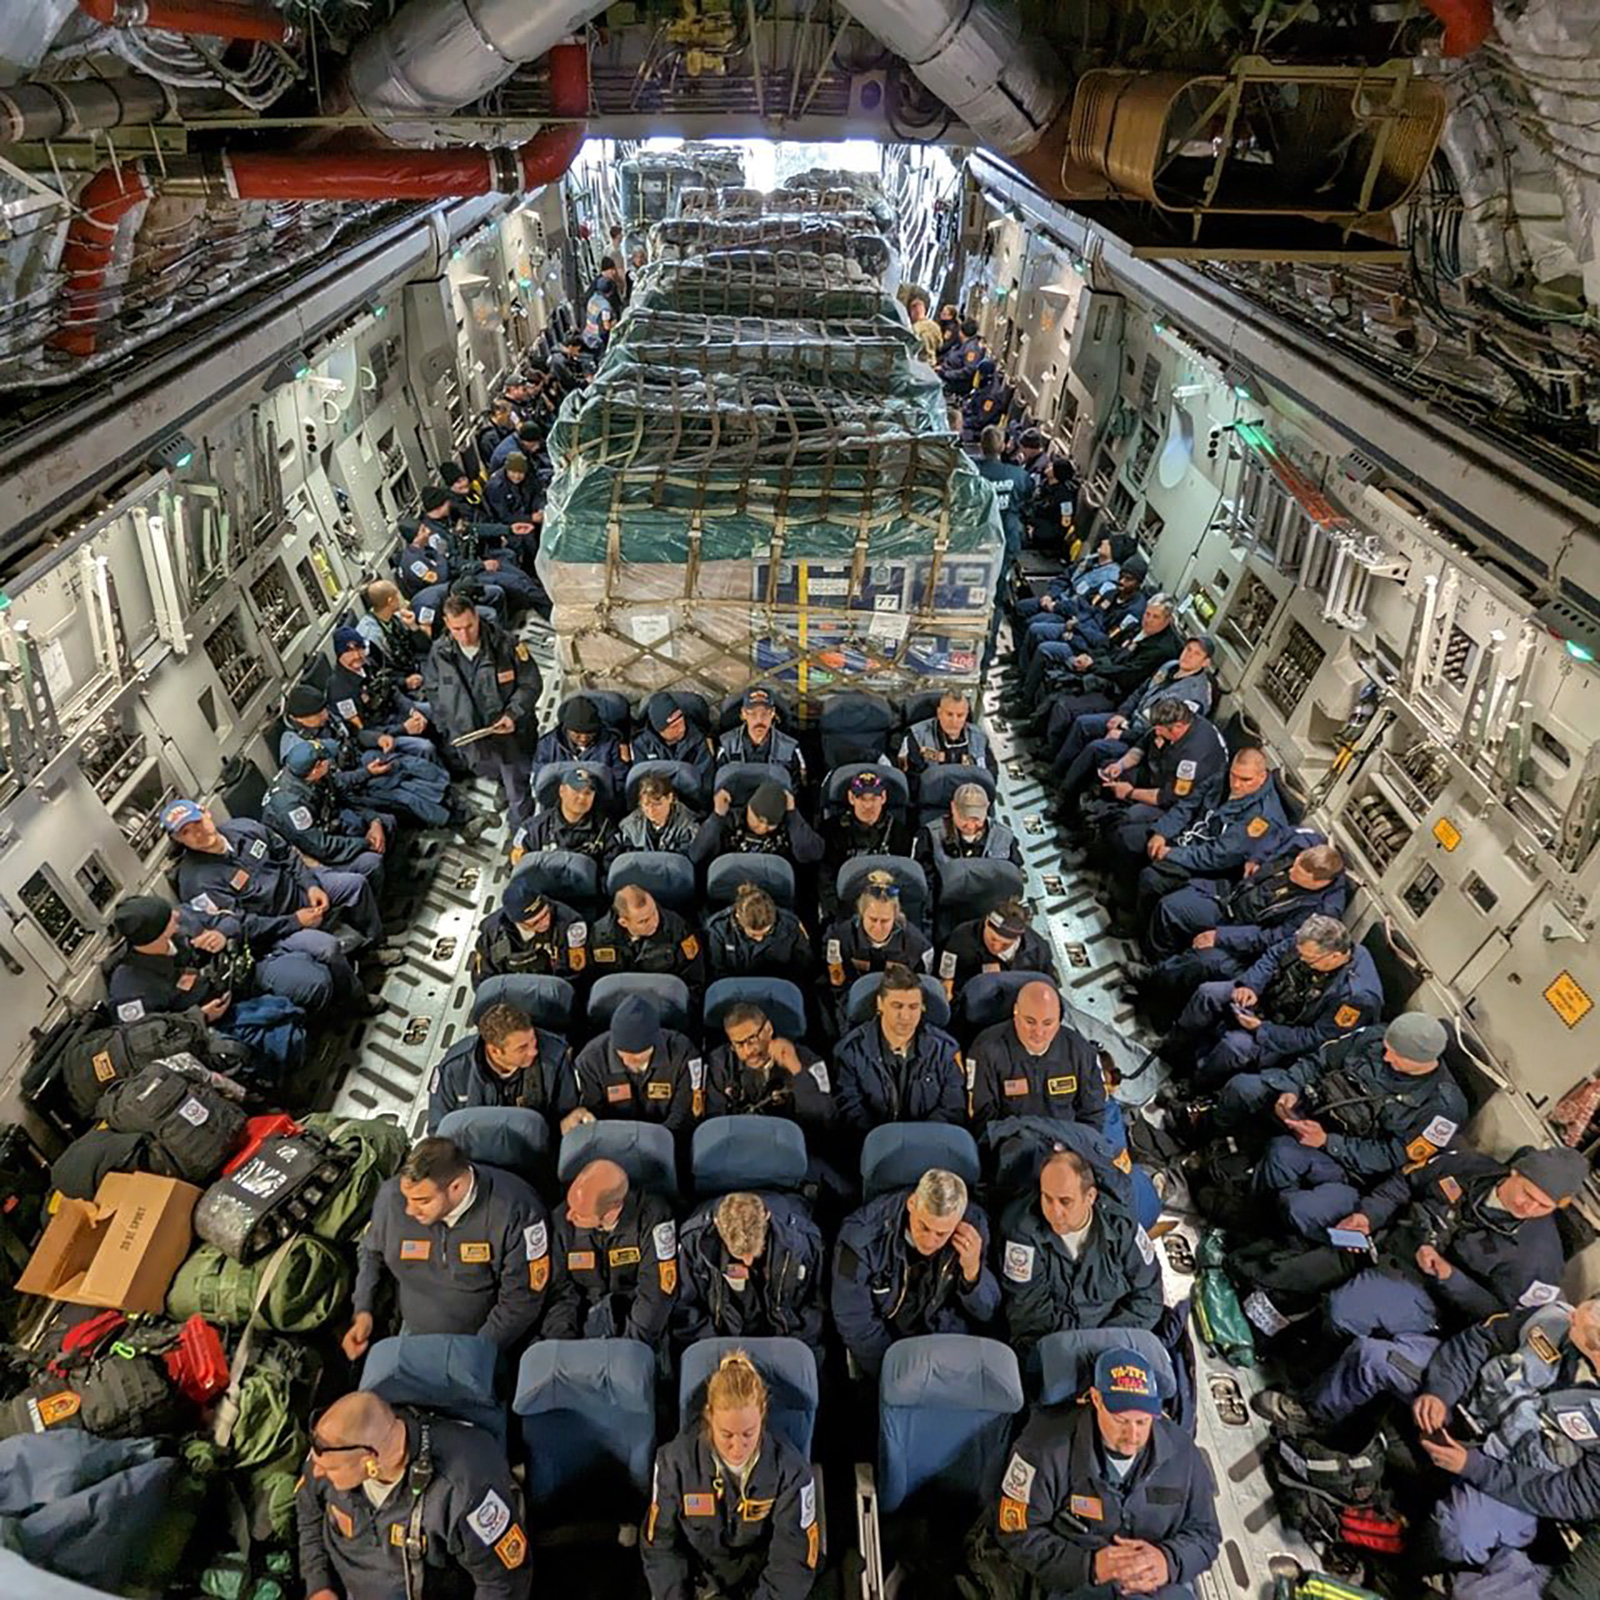 USA-01 Heavy USAR team members are in the air enroute to Turkey as a part of the USAID's Bureau for Humanitarian Assistance Disaster Assistance Response Team.